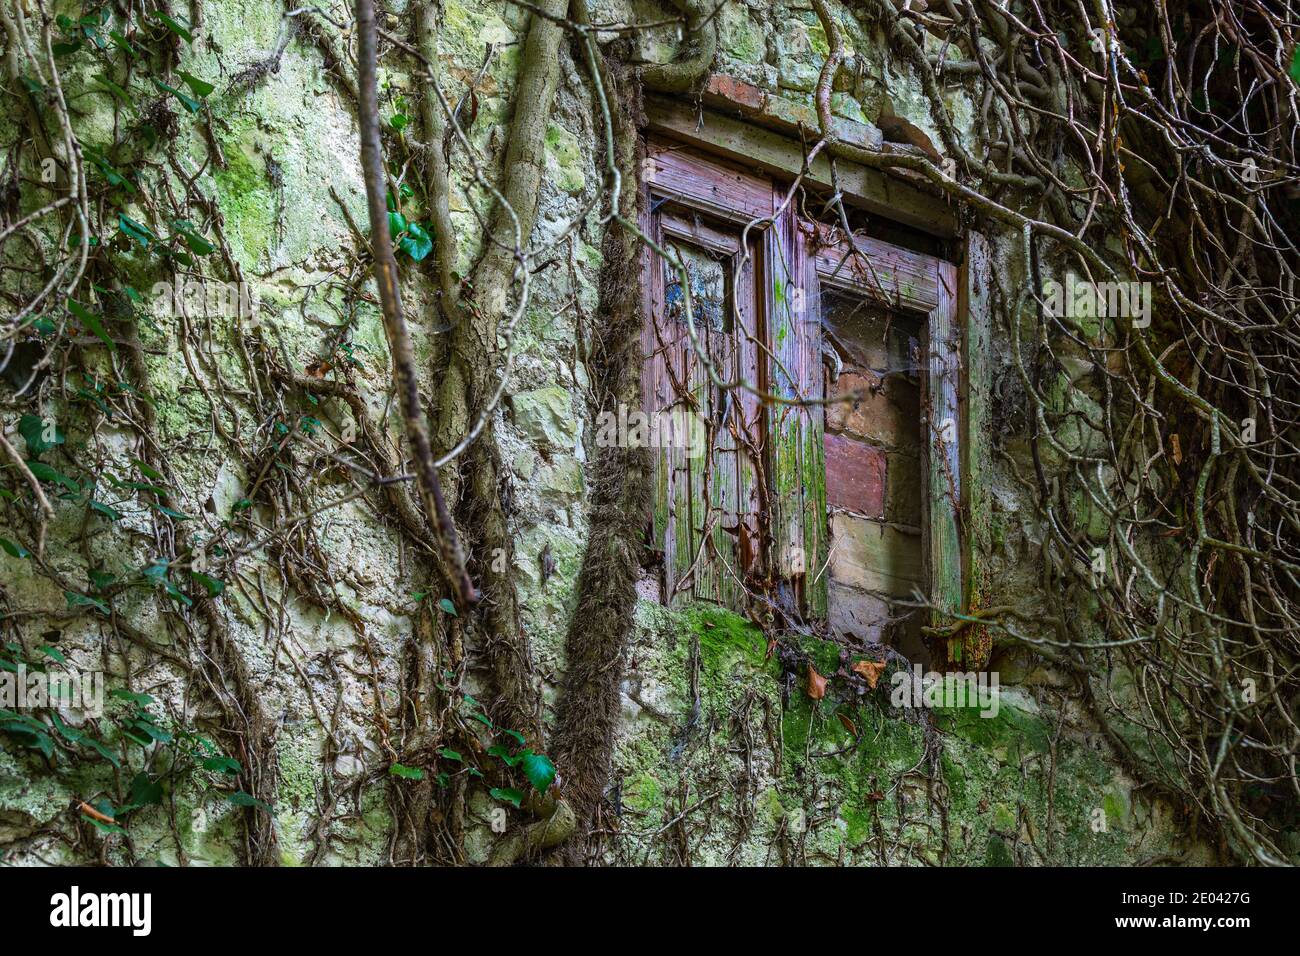 Ruins of old houses of an ancient village lost in the woods Stock Photo